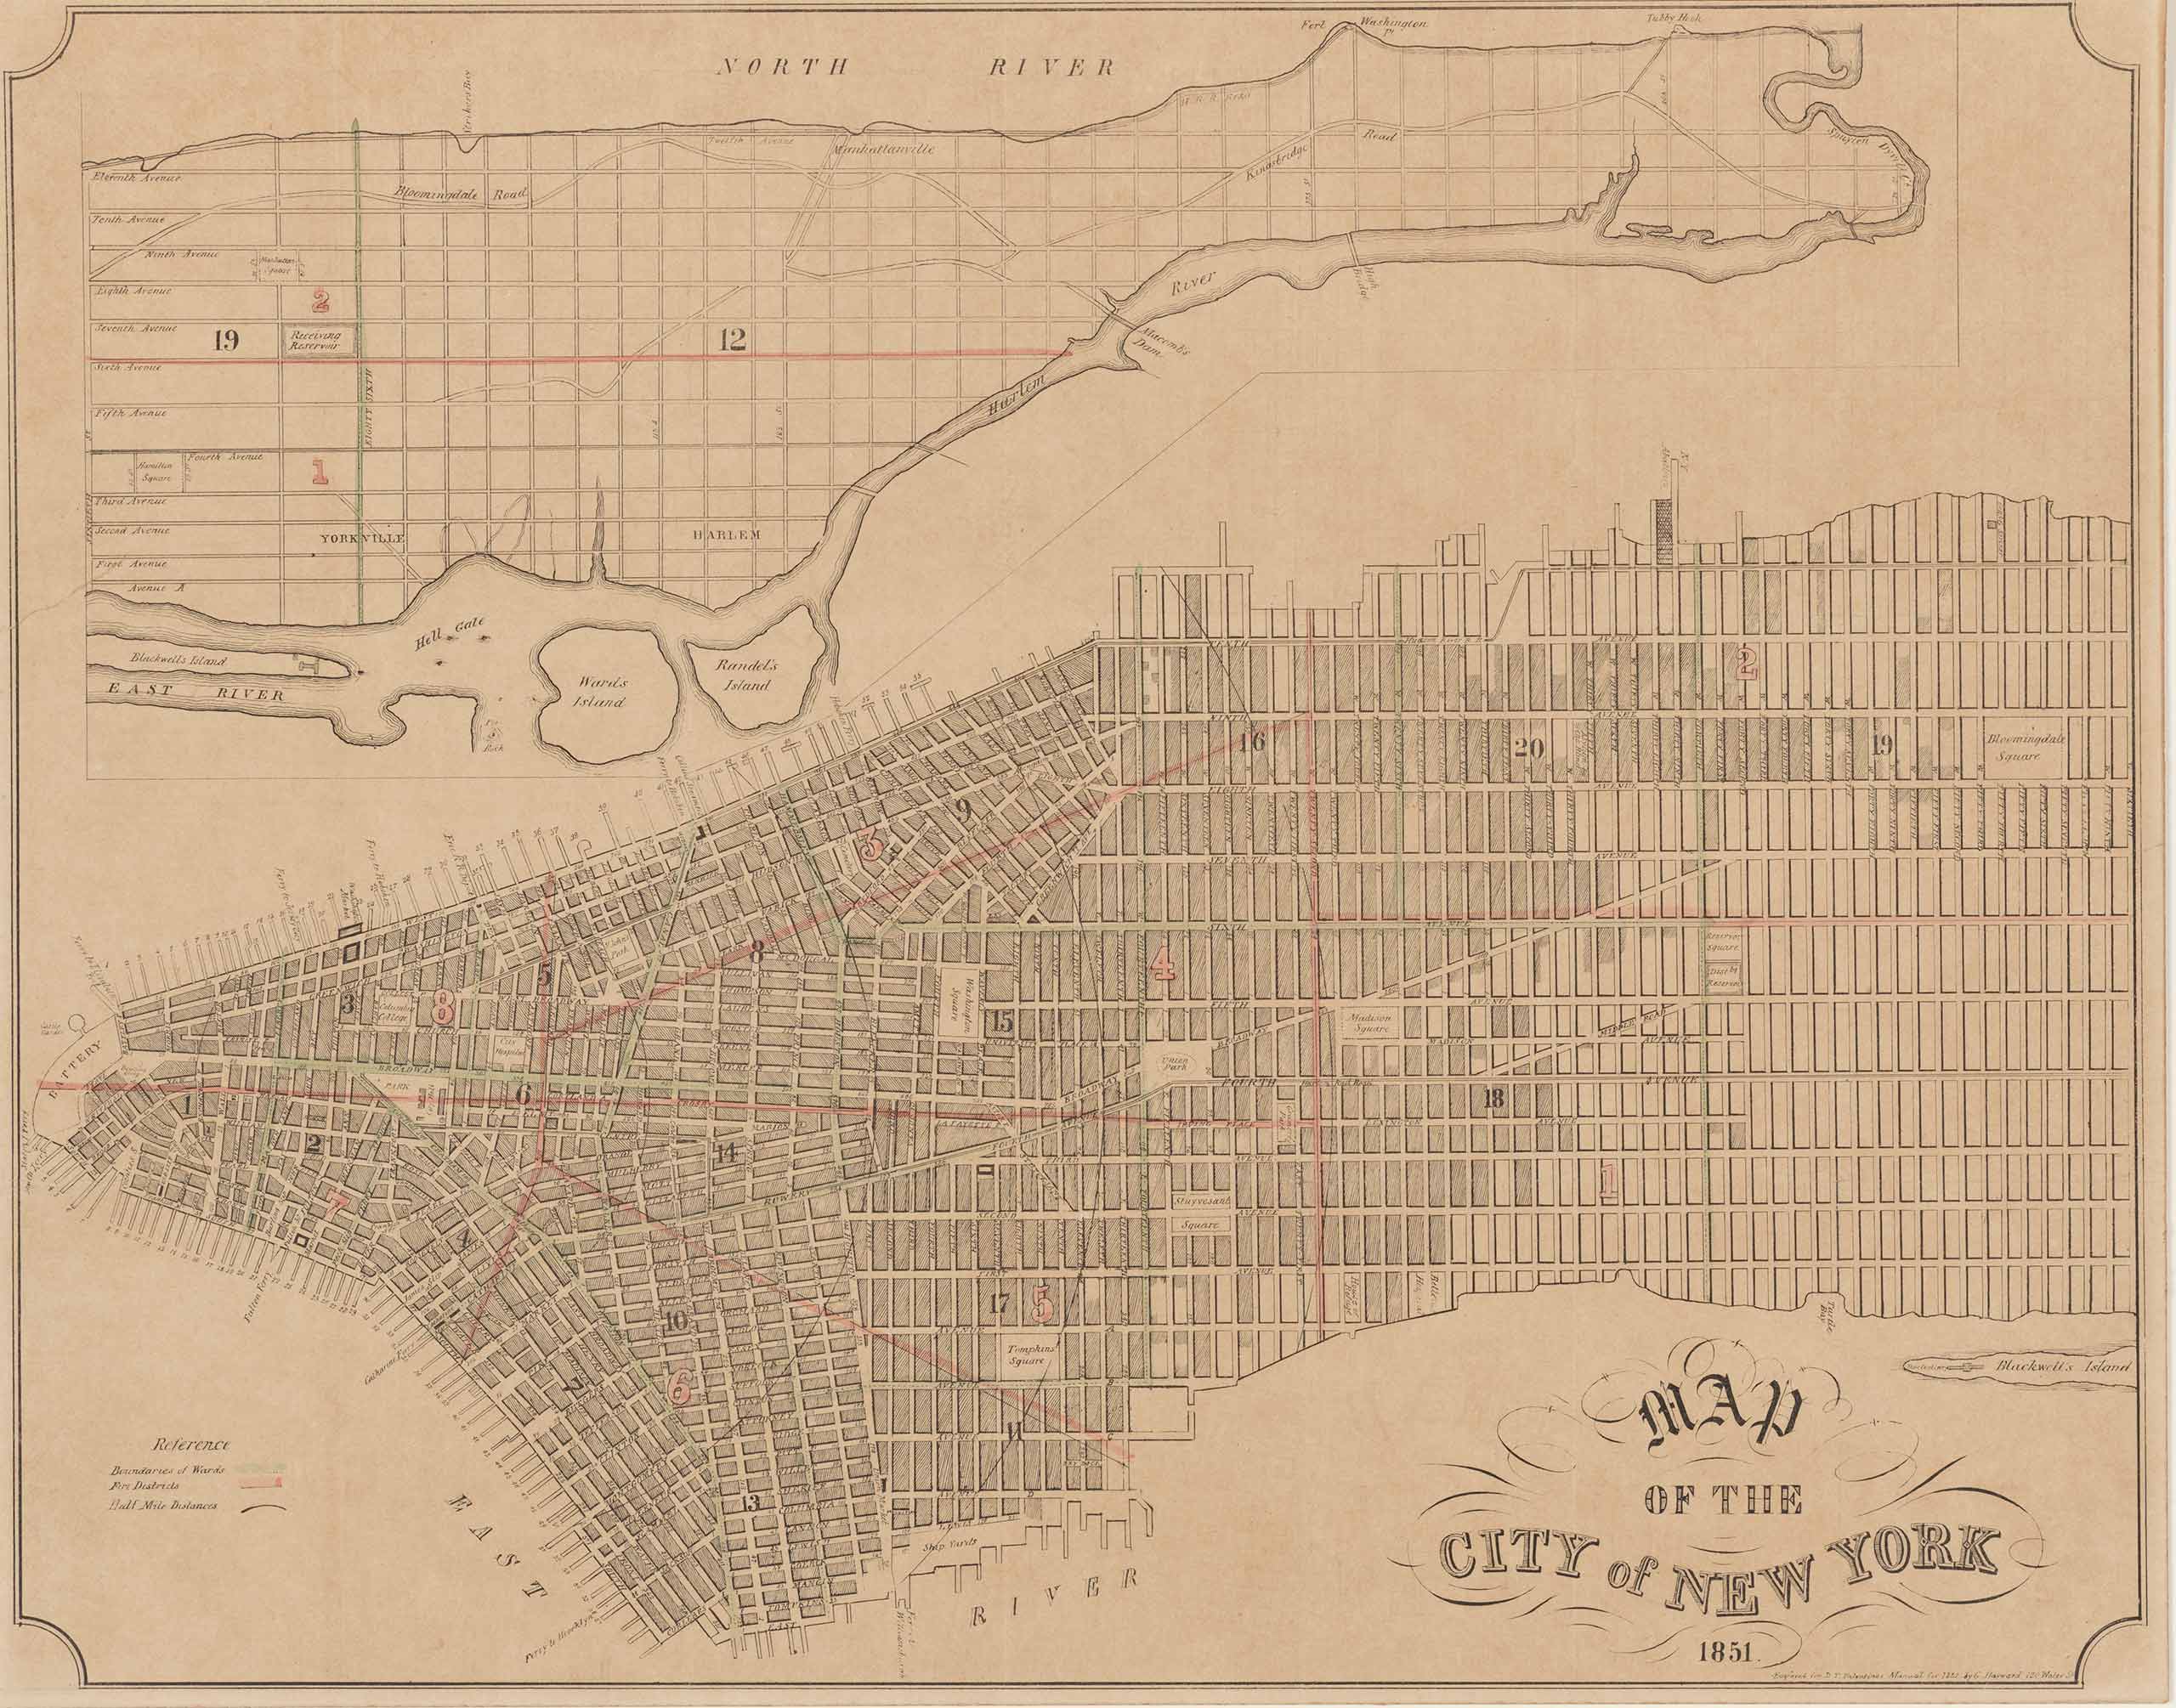 Planning map for the New York City grid system. The map shows all of Manhattan, with the streets and parks labeled.